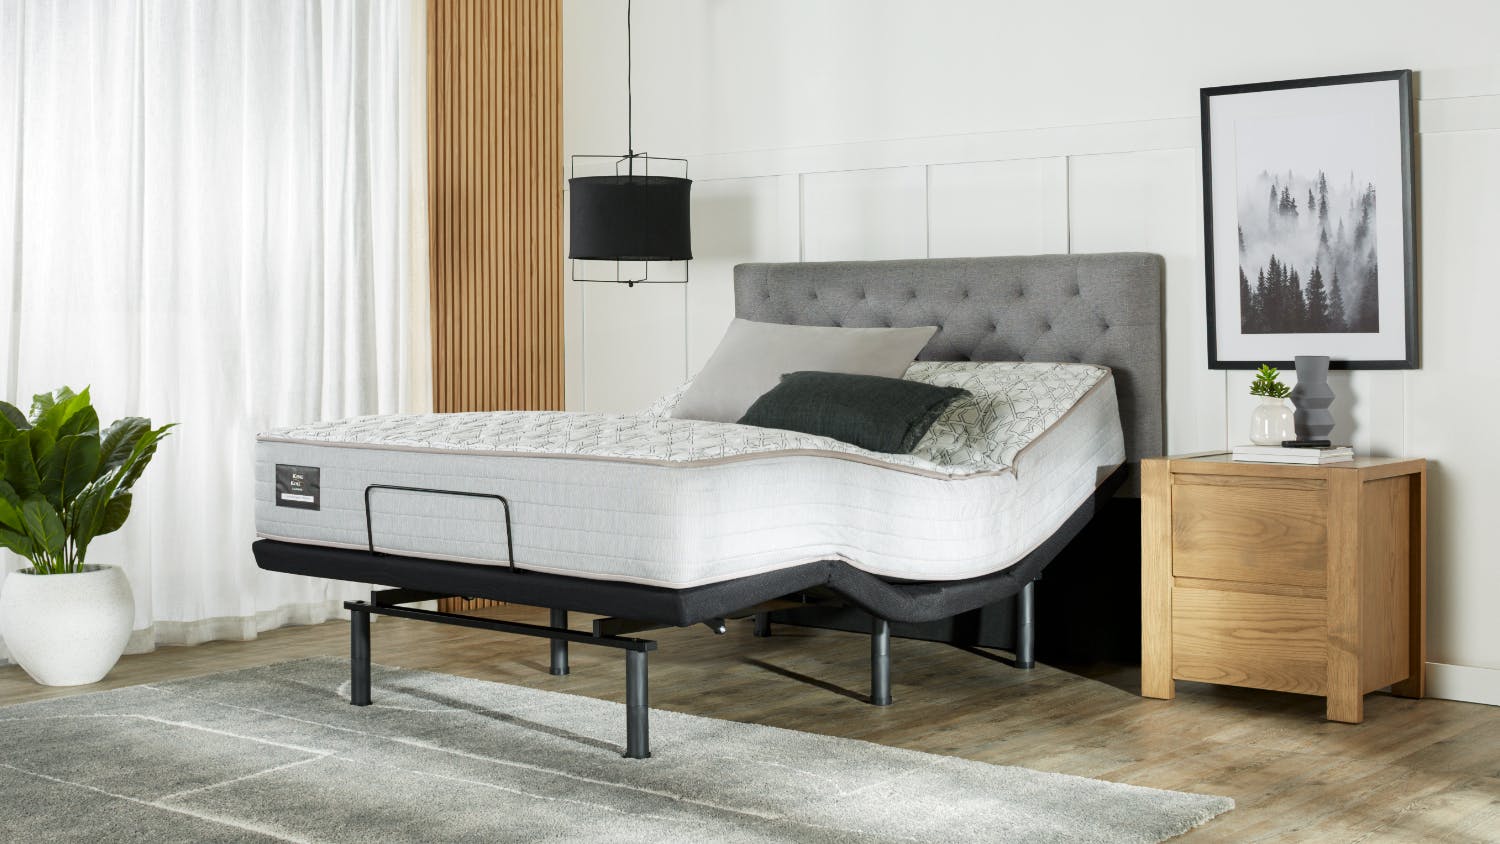 King Koil Conforma Classic II Firm Queen Mattress with Virtue Adjustable Base by A.H Beard